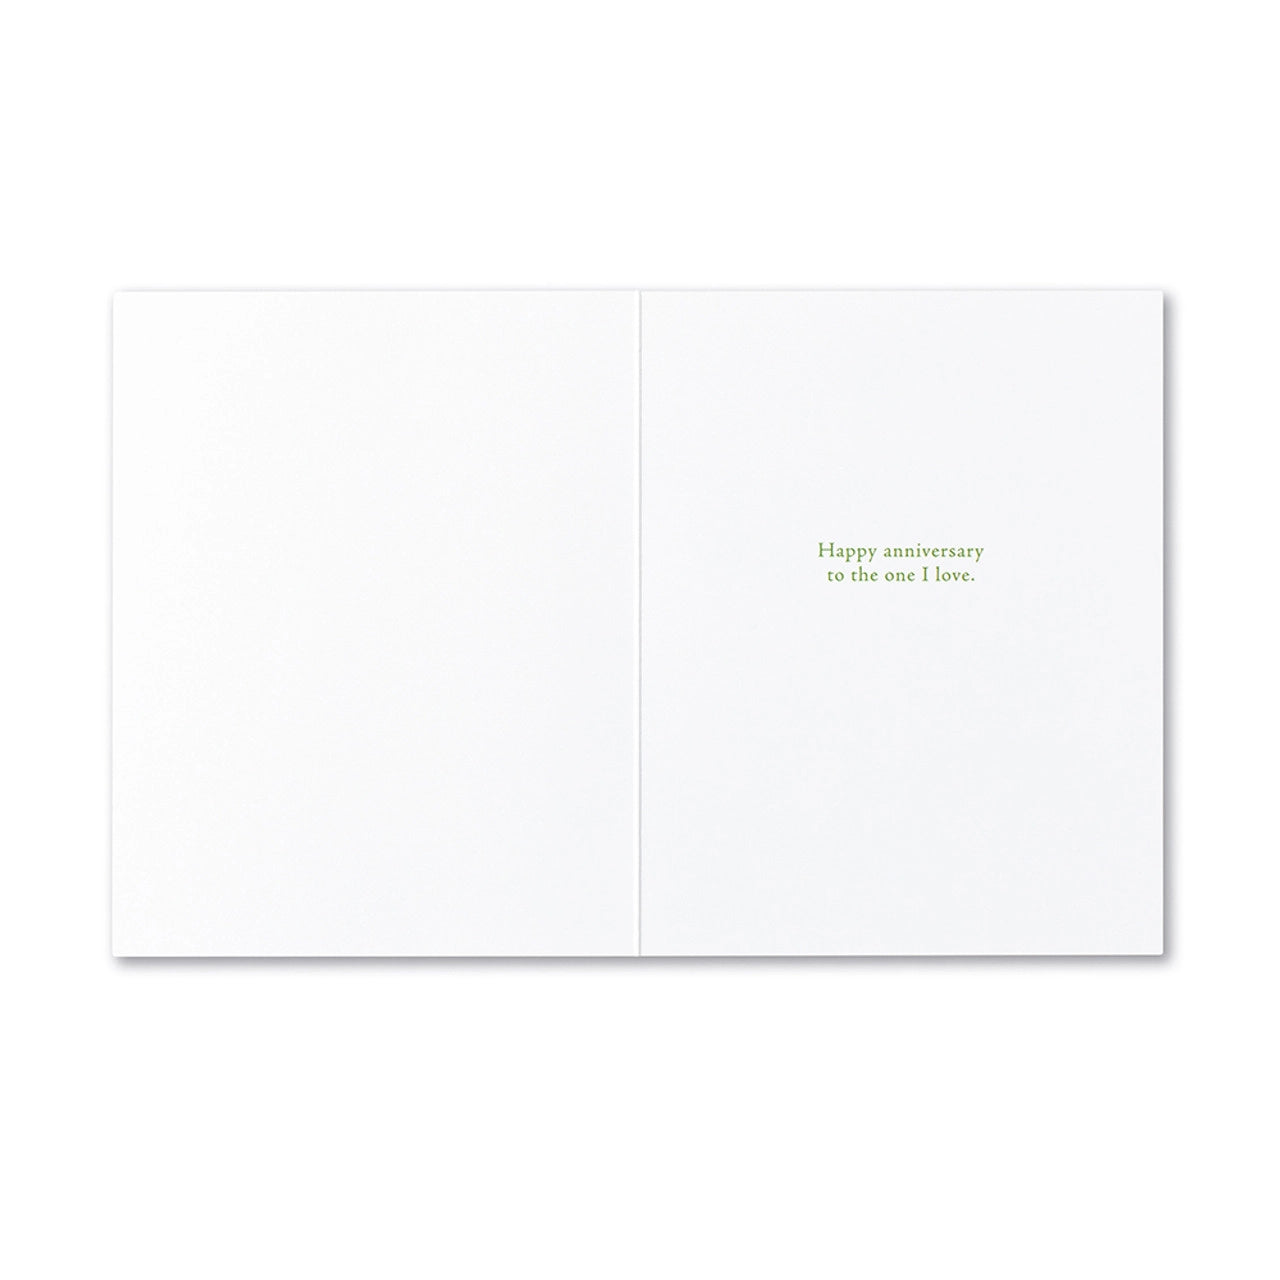 Positively Green Anniversary Greeting Card - “You have my whole heart, for my whole life.” —French Proverb - Mellow Monkey